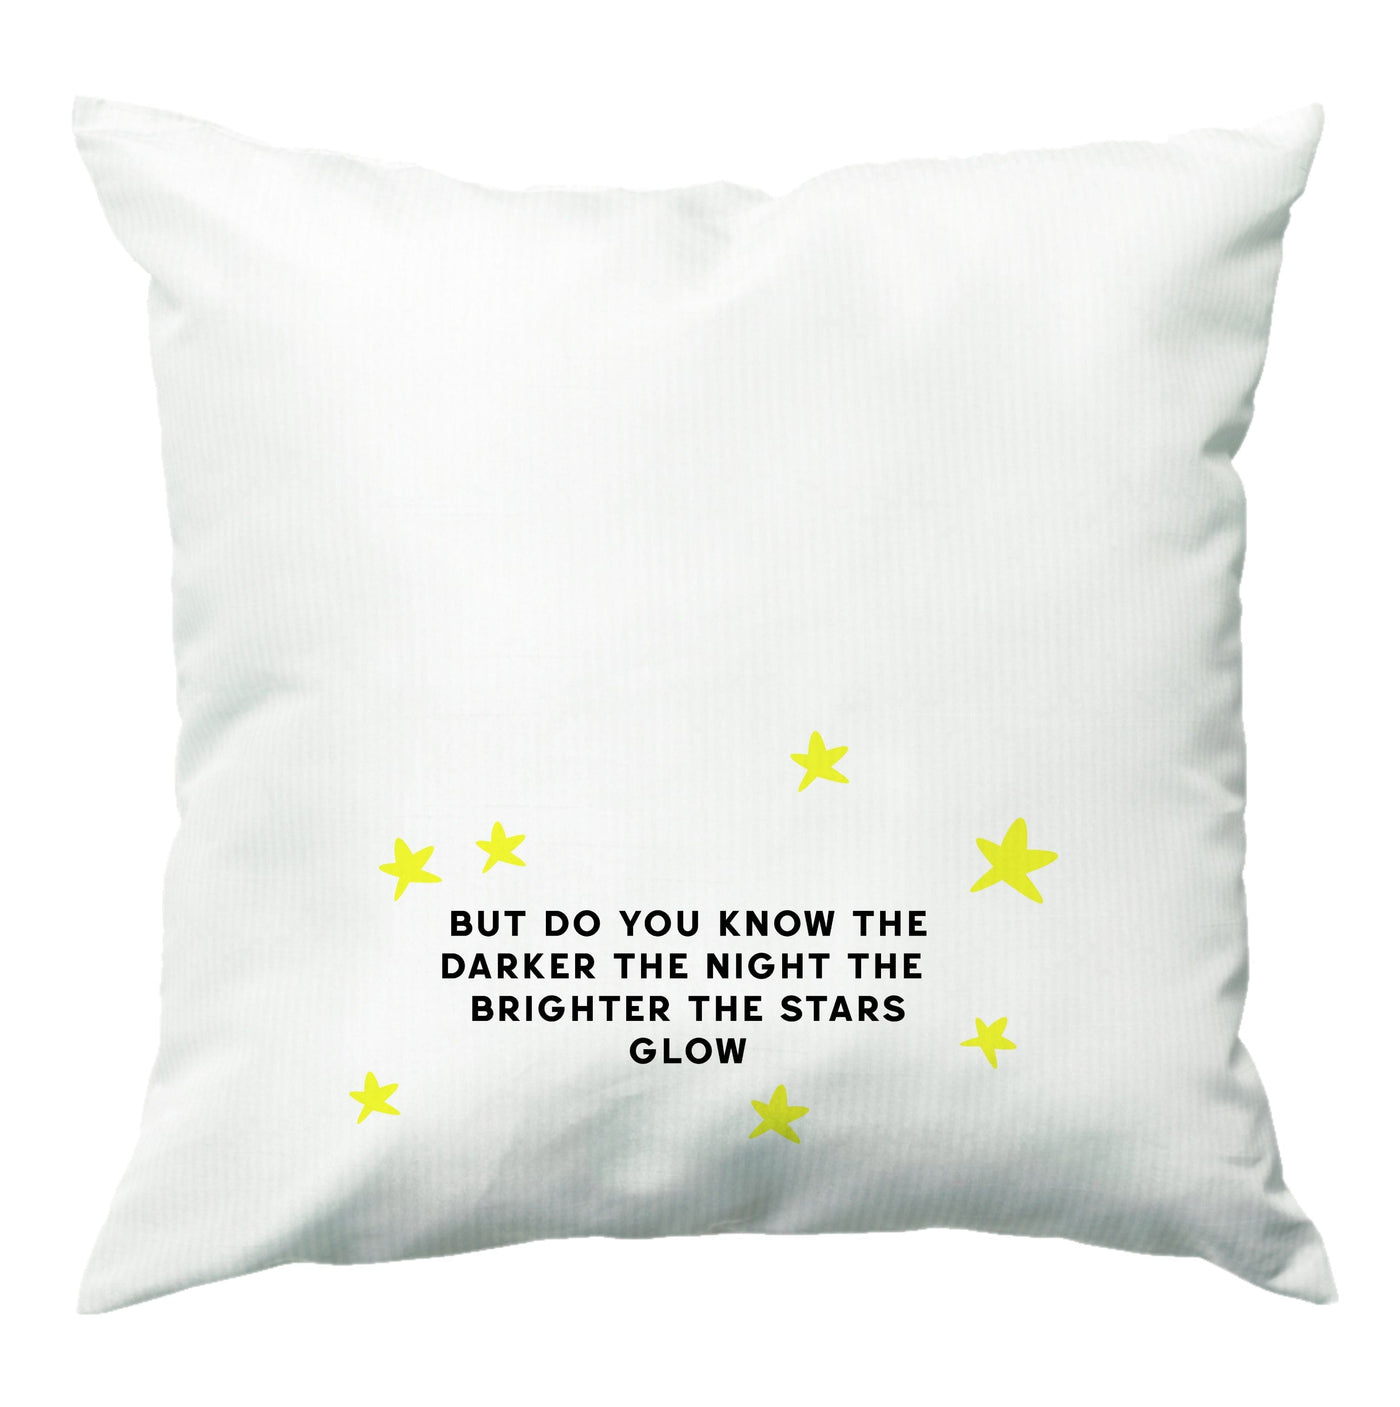 Brighter The Stars Glow - Katy Perry Cushion